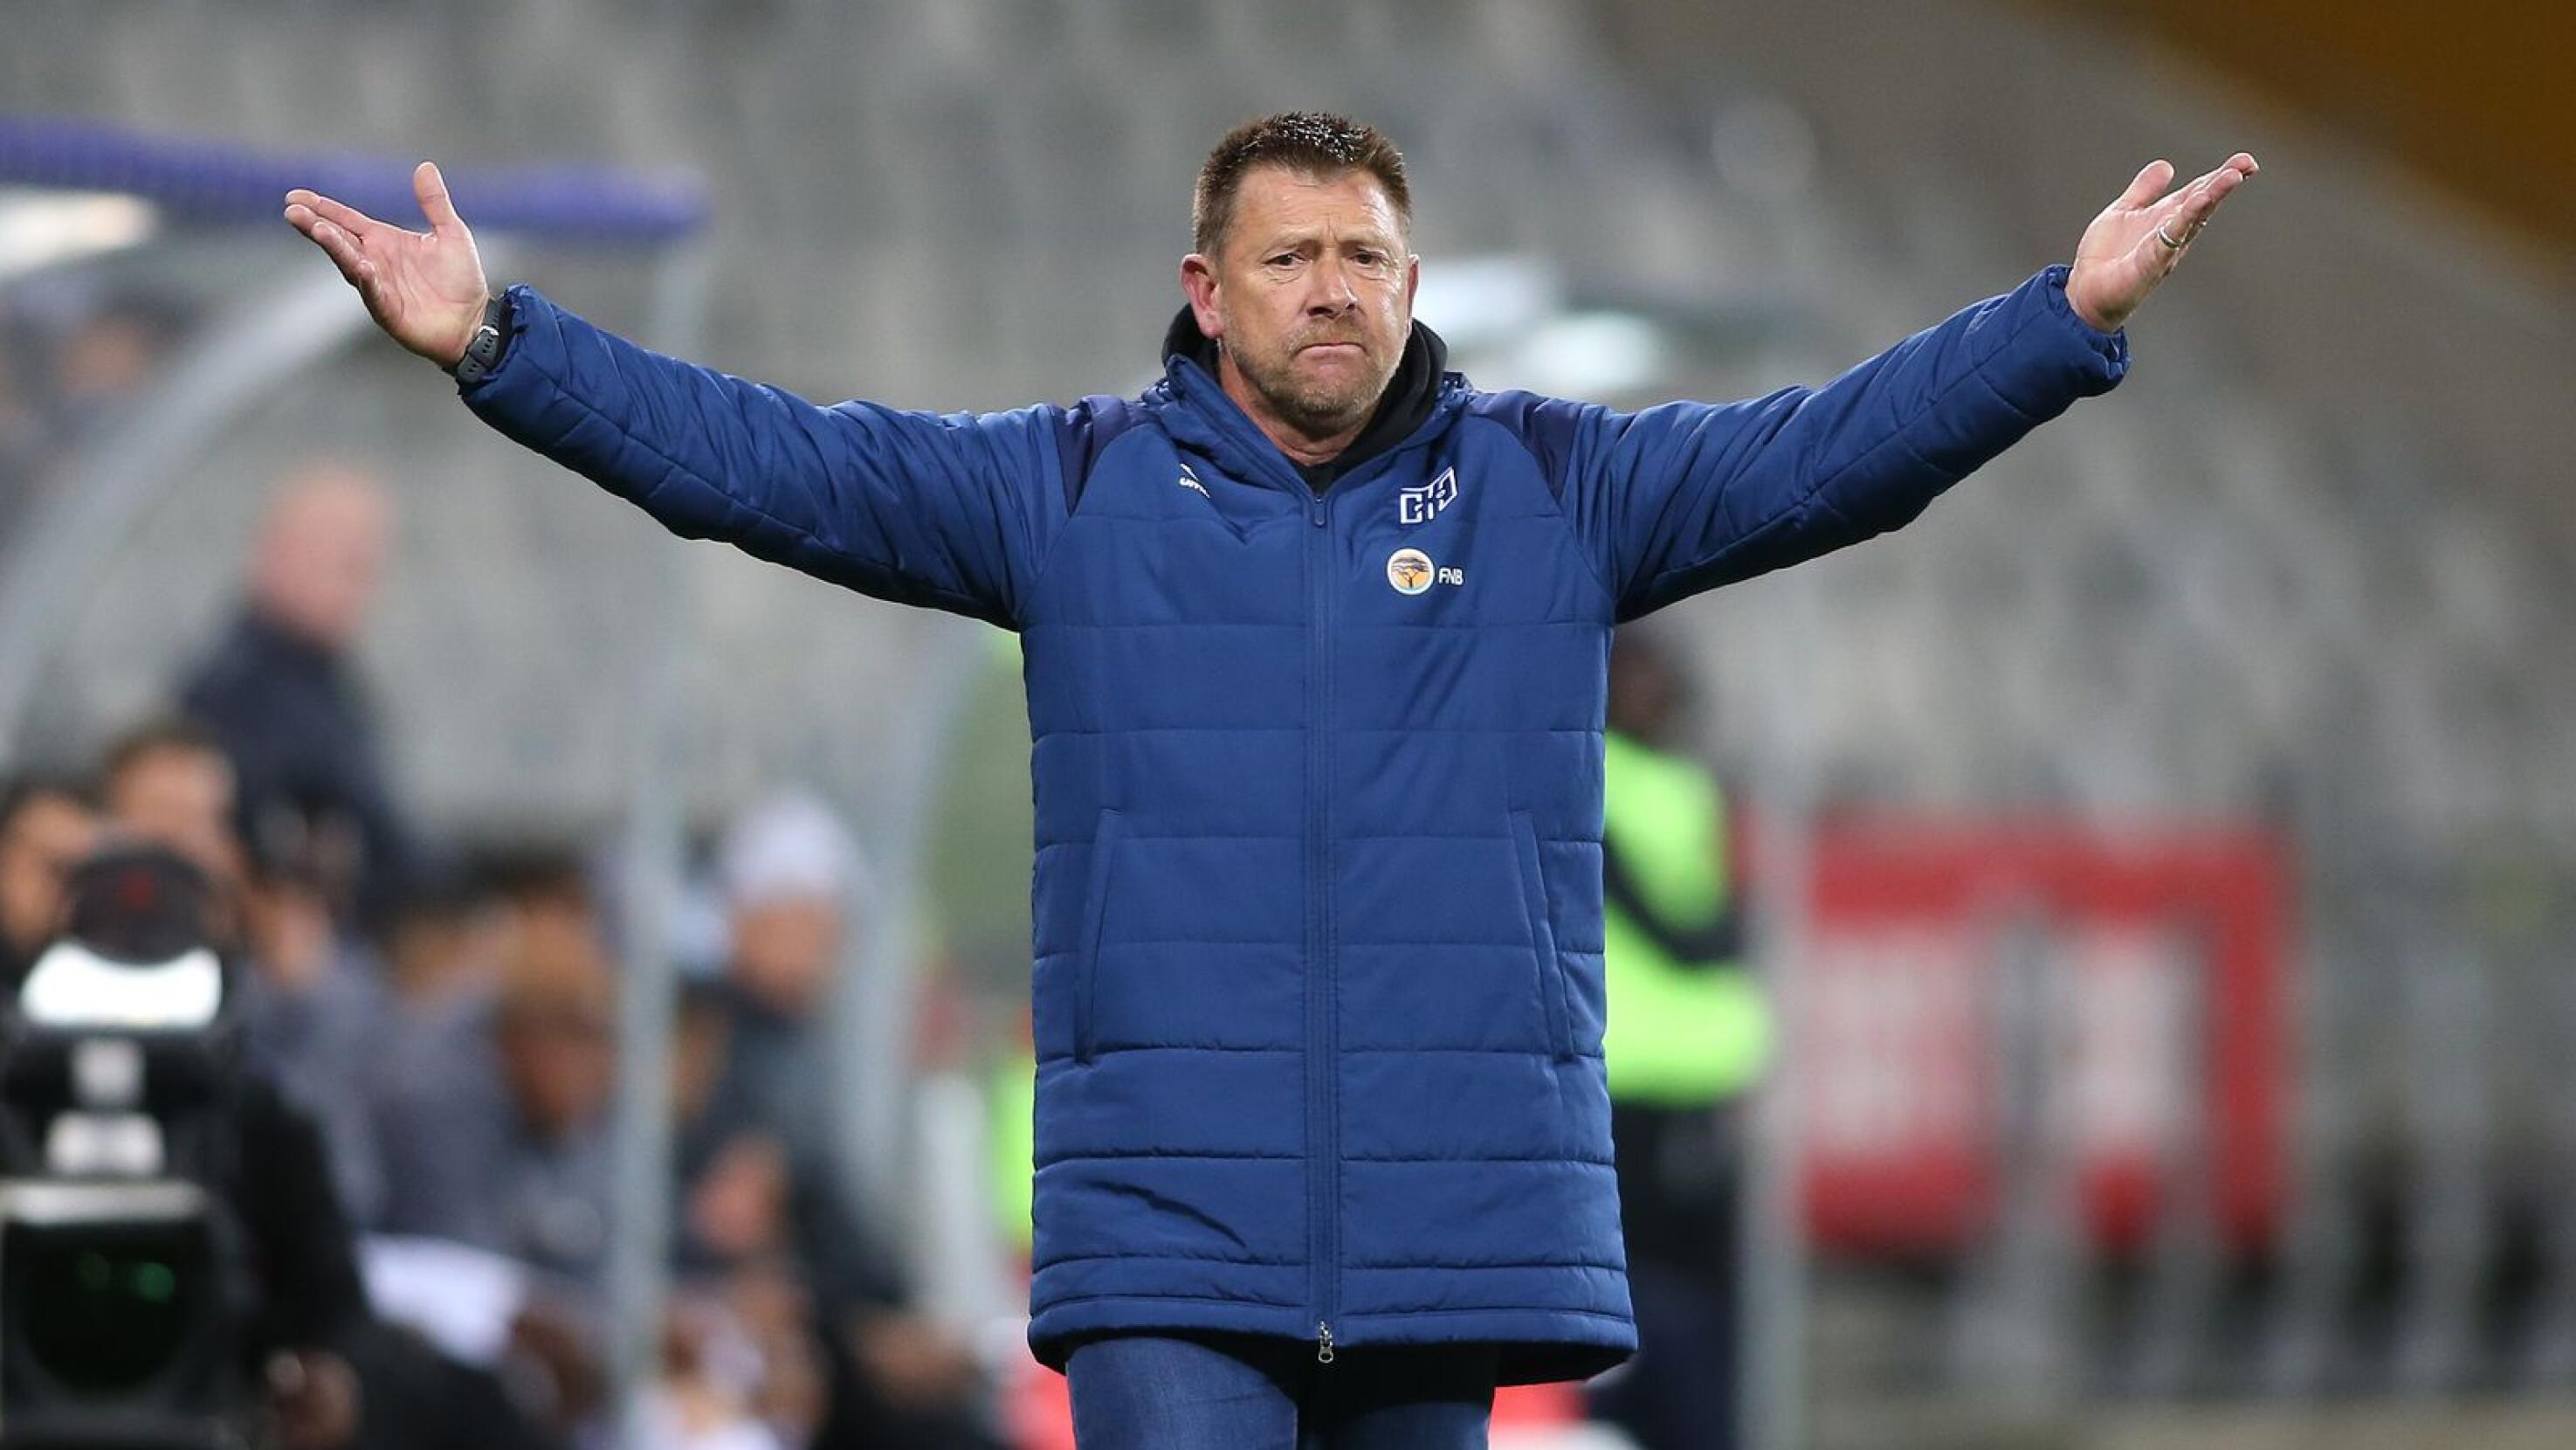 Cape Town City head coach Eric Tinkler reacts during their DStv Premiership match against Stellenbosch FC at Cape Town Stadium in Cape Town on Saturday